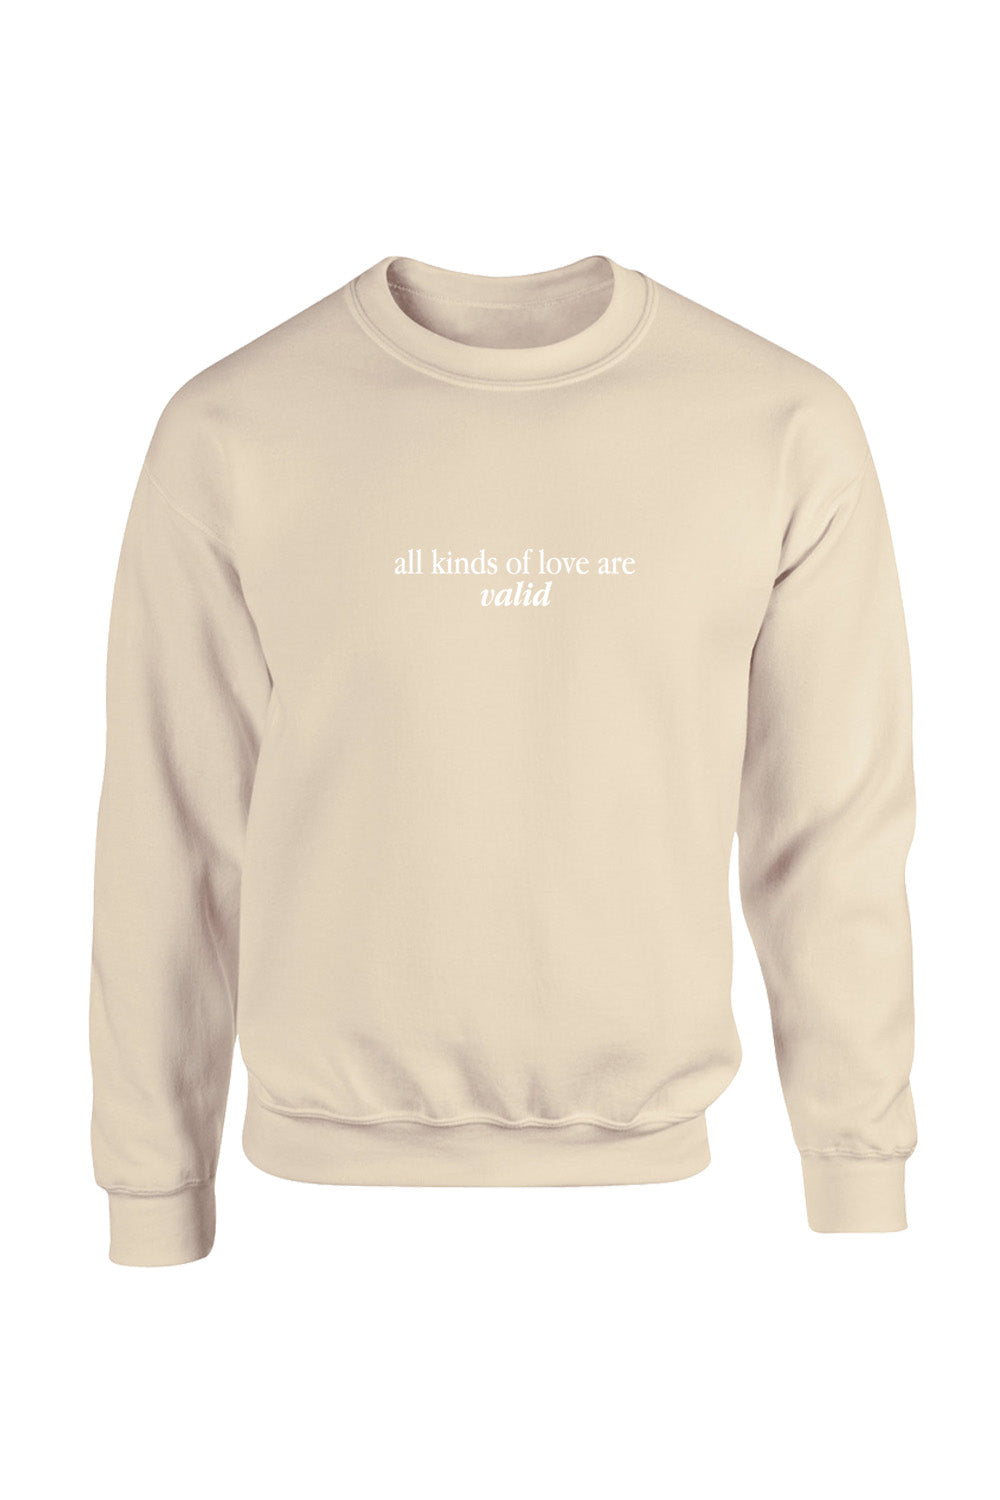 All Kinds Of Love Are Valid Crewneck